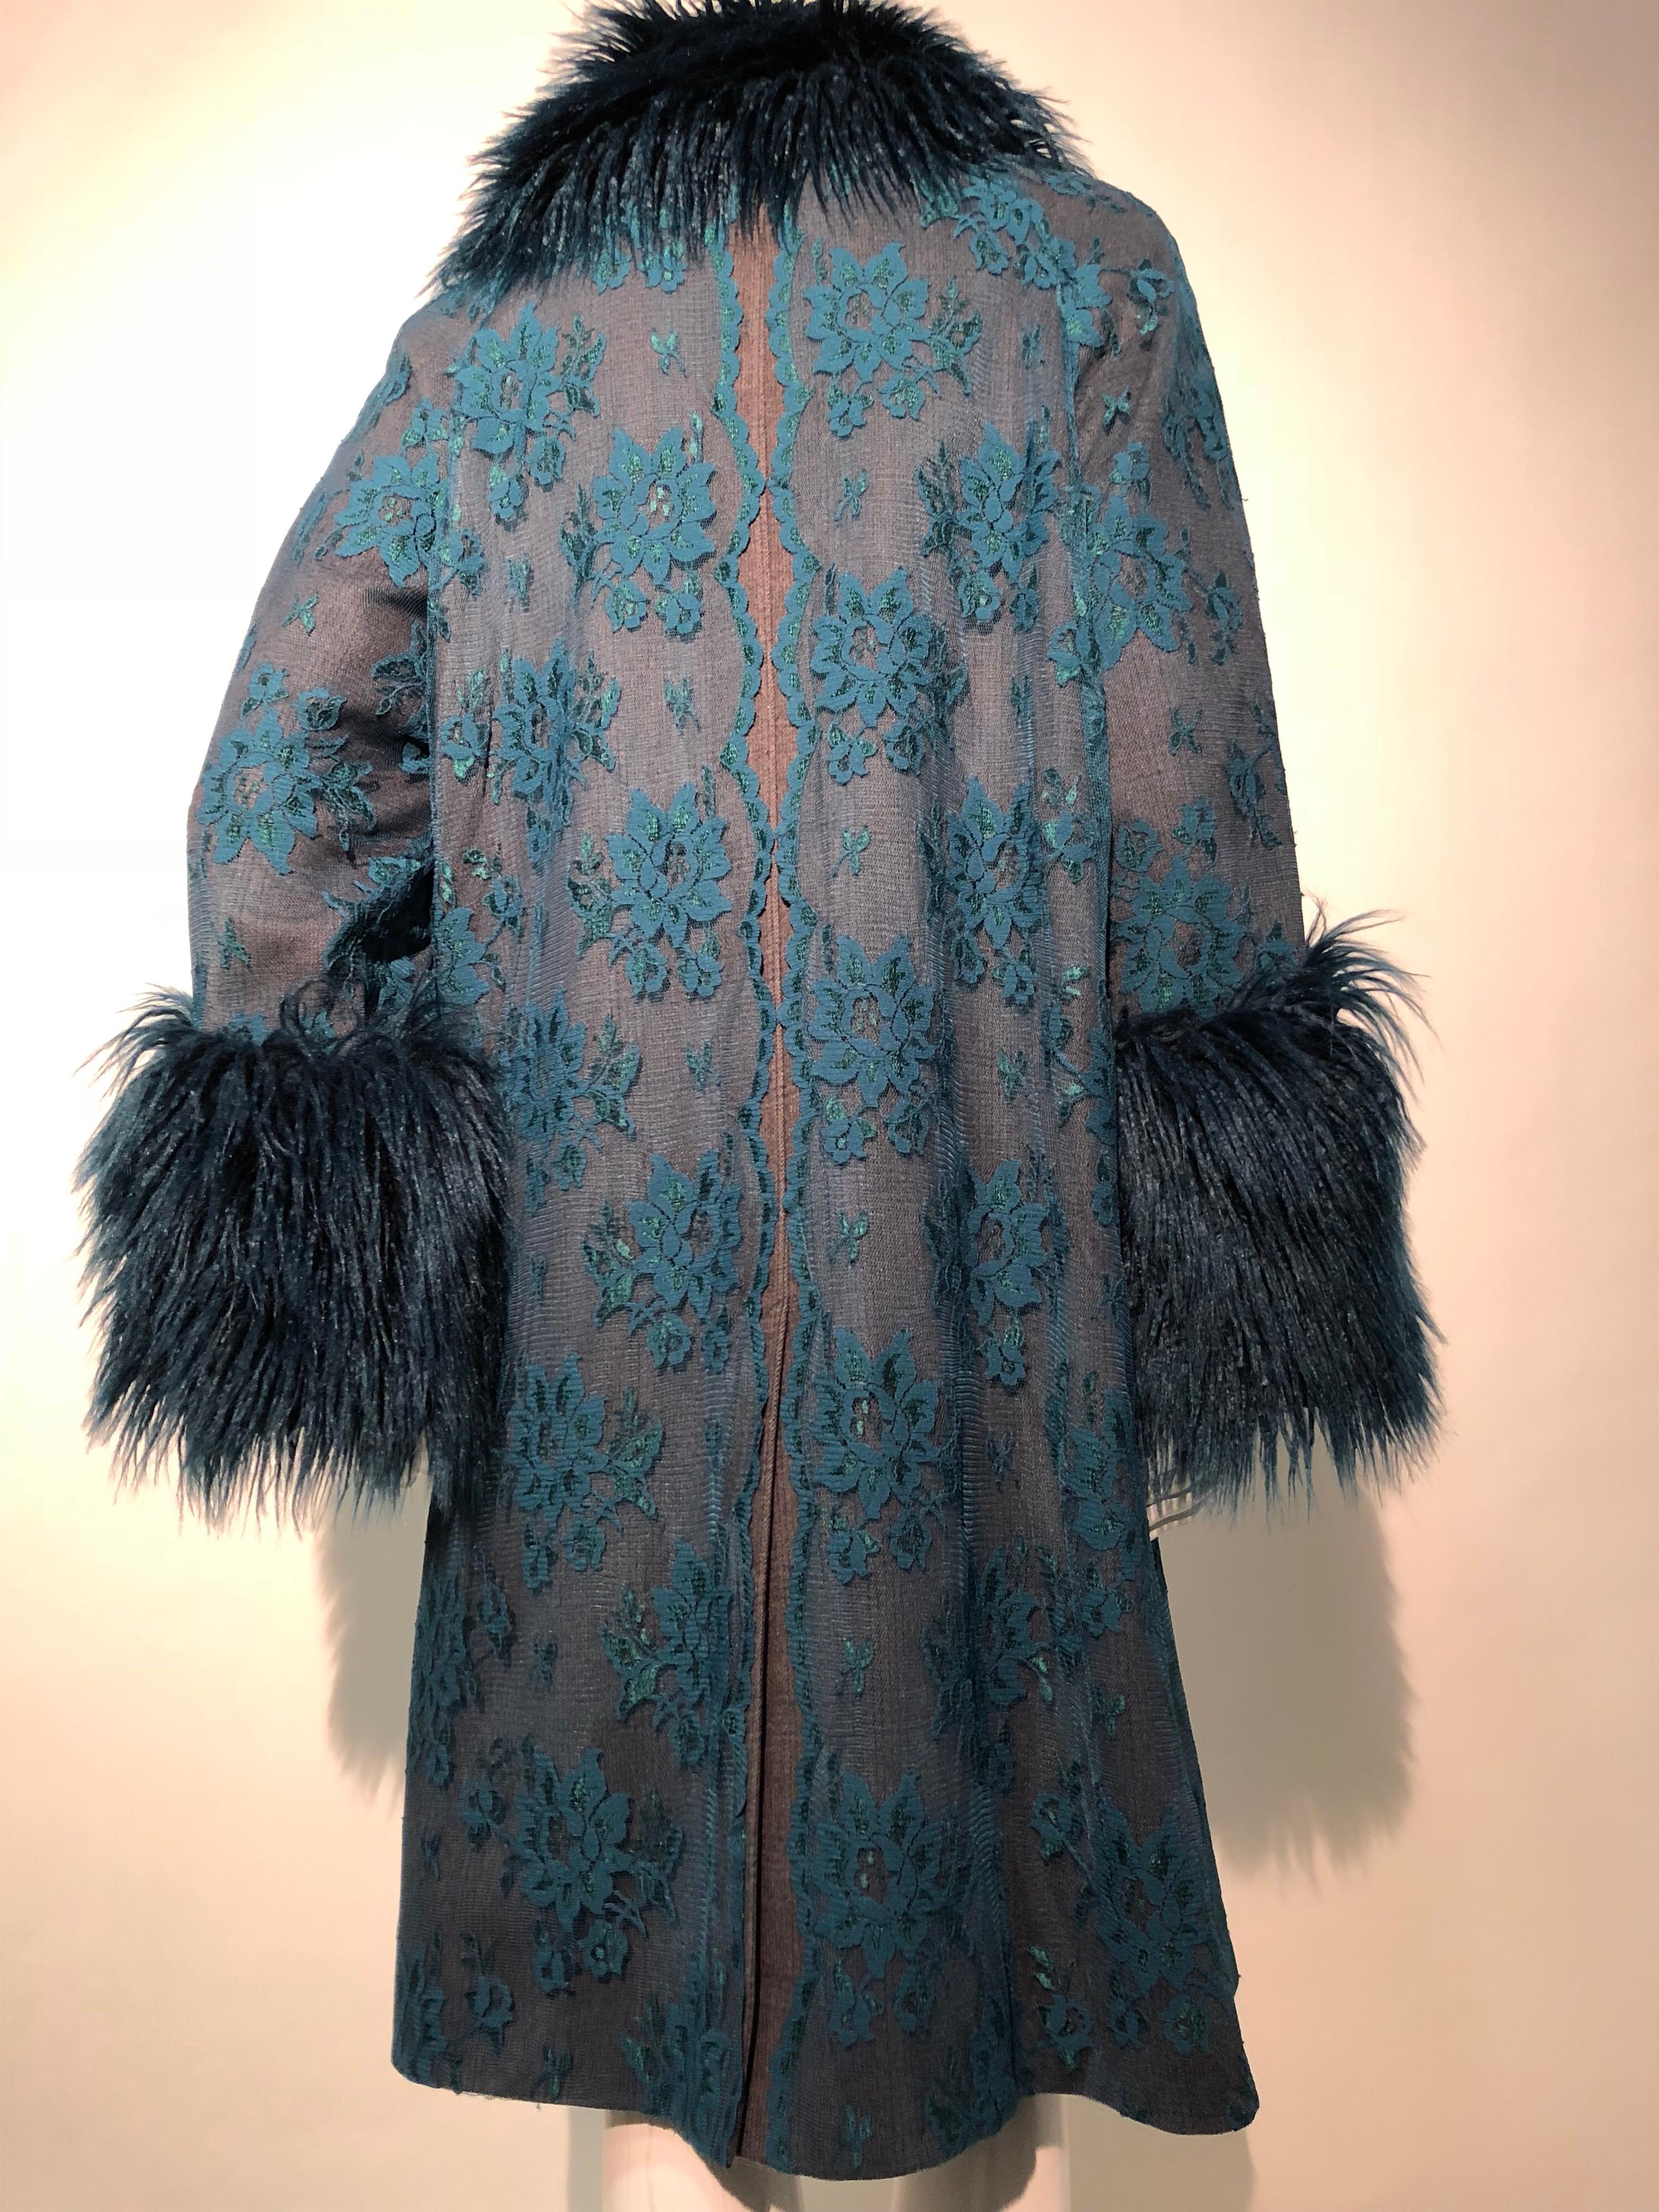 Black Torso Creations 1950s Grey Wool Coat W/ Teal Lace Overlay & Coordinated Faux Fur